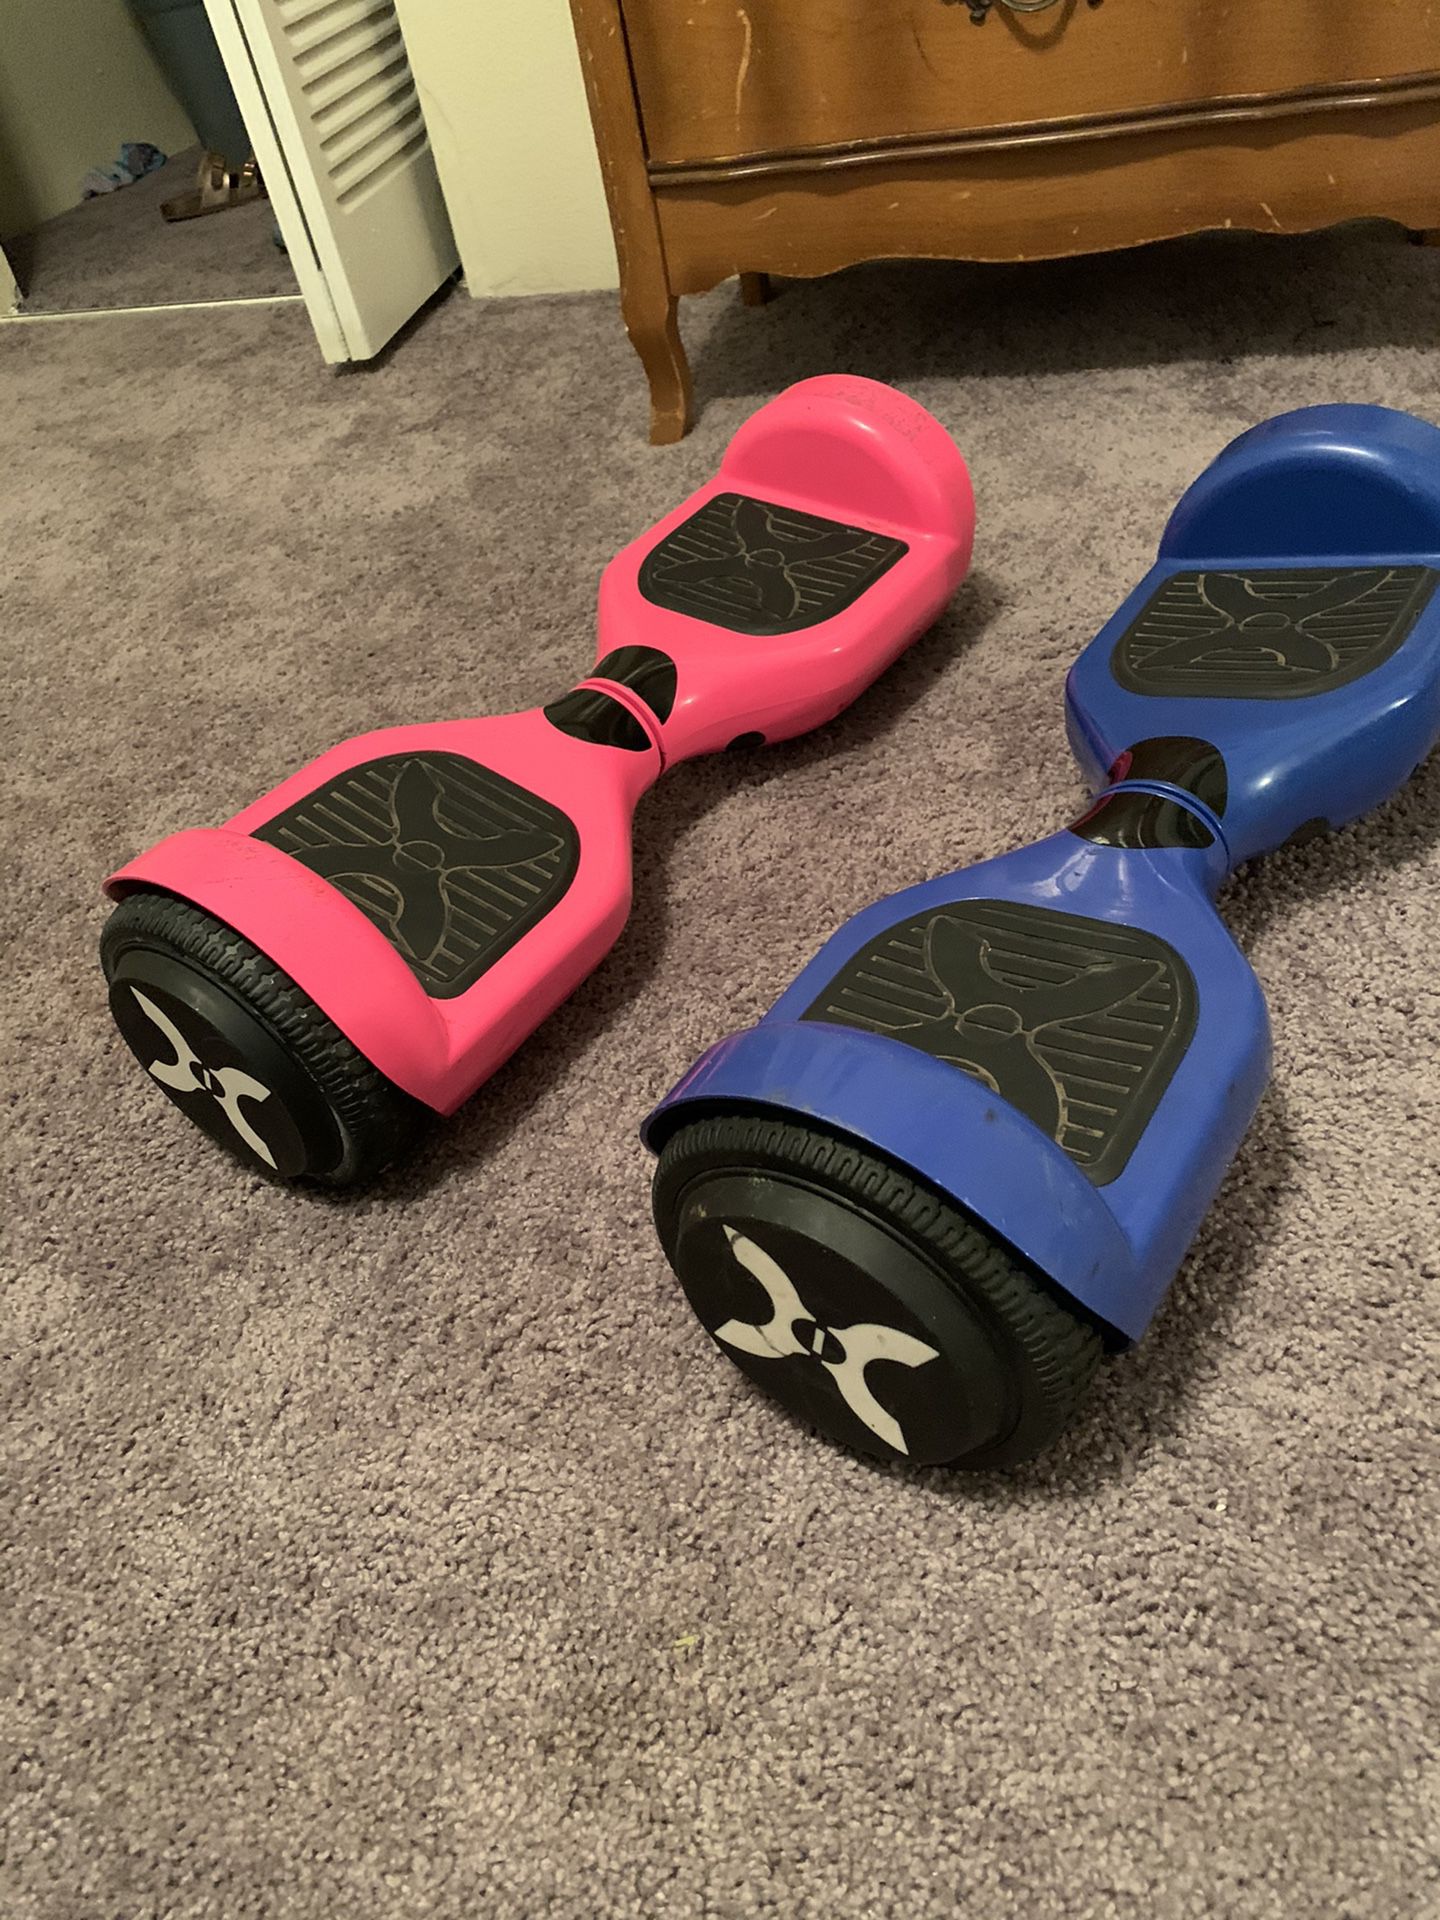 Barely used hoverboards both for $80 need gone today